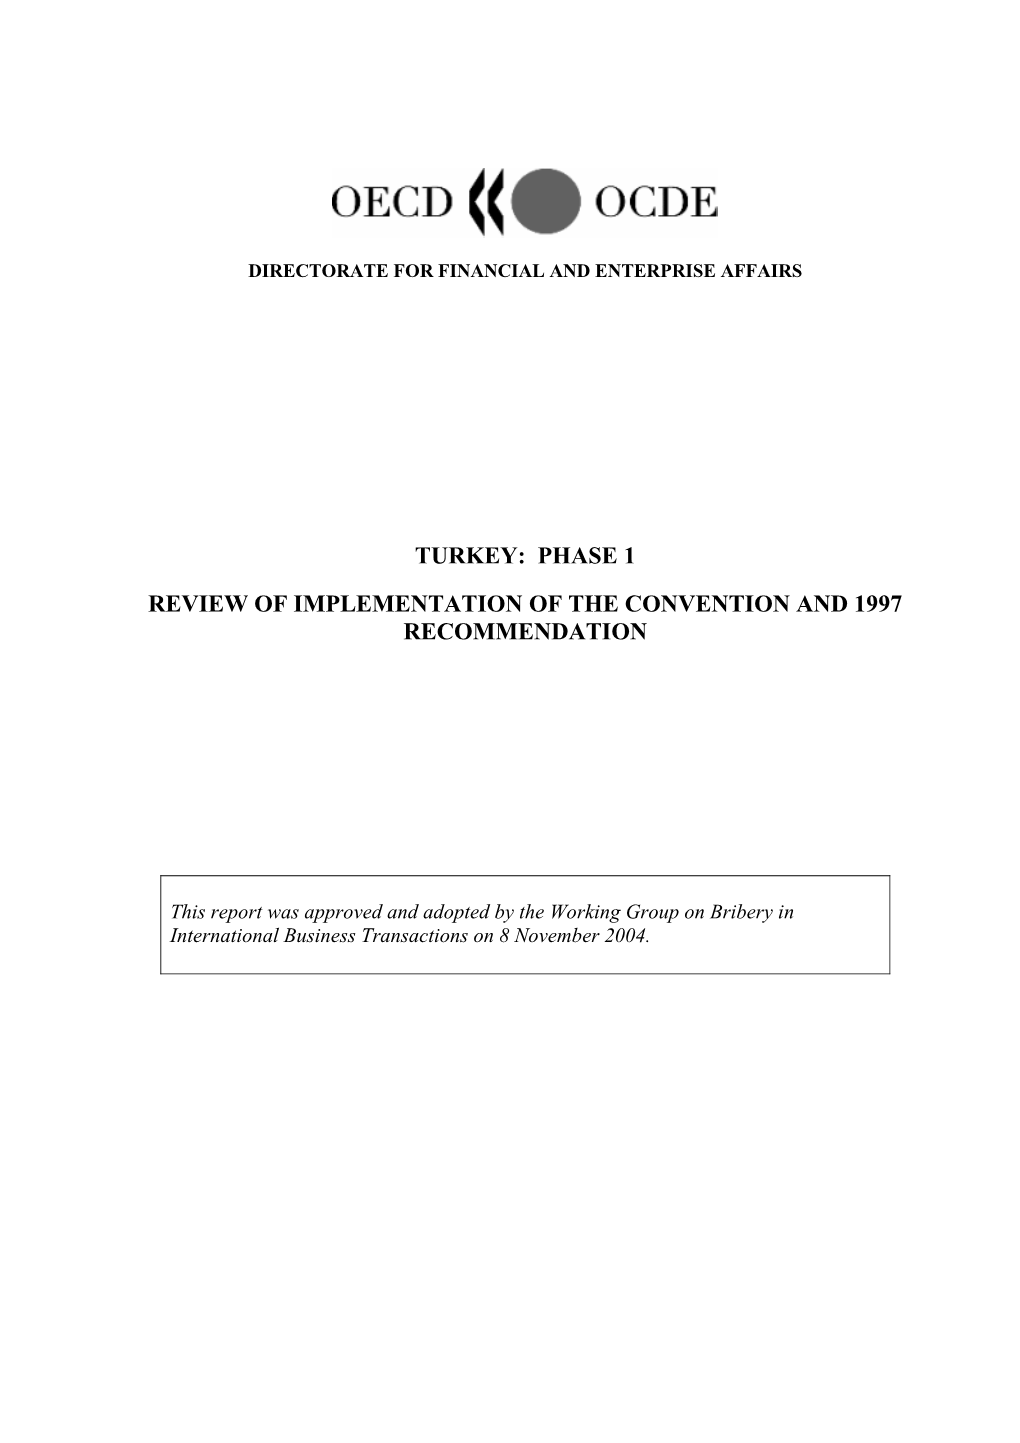 Turkey: Phase 1 Review of Implementation of the Convention and 1997 Recommendation